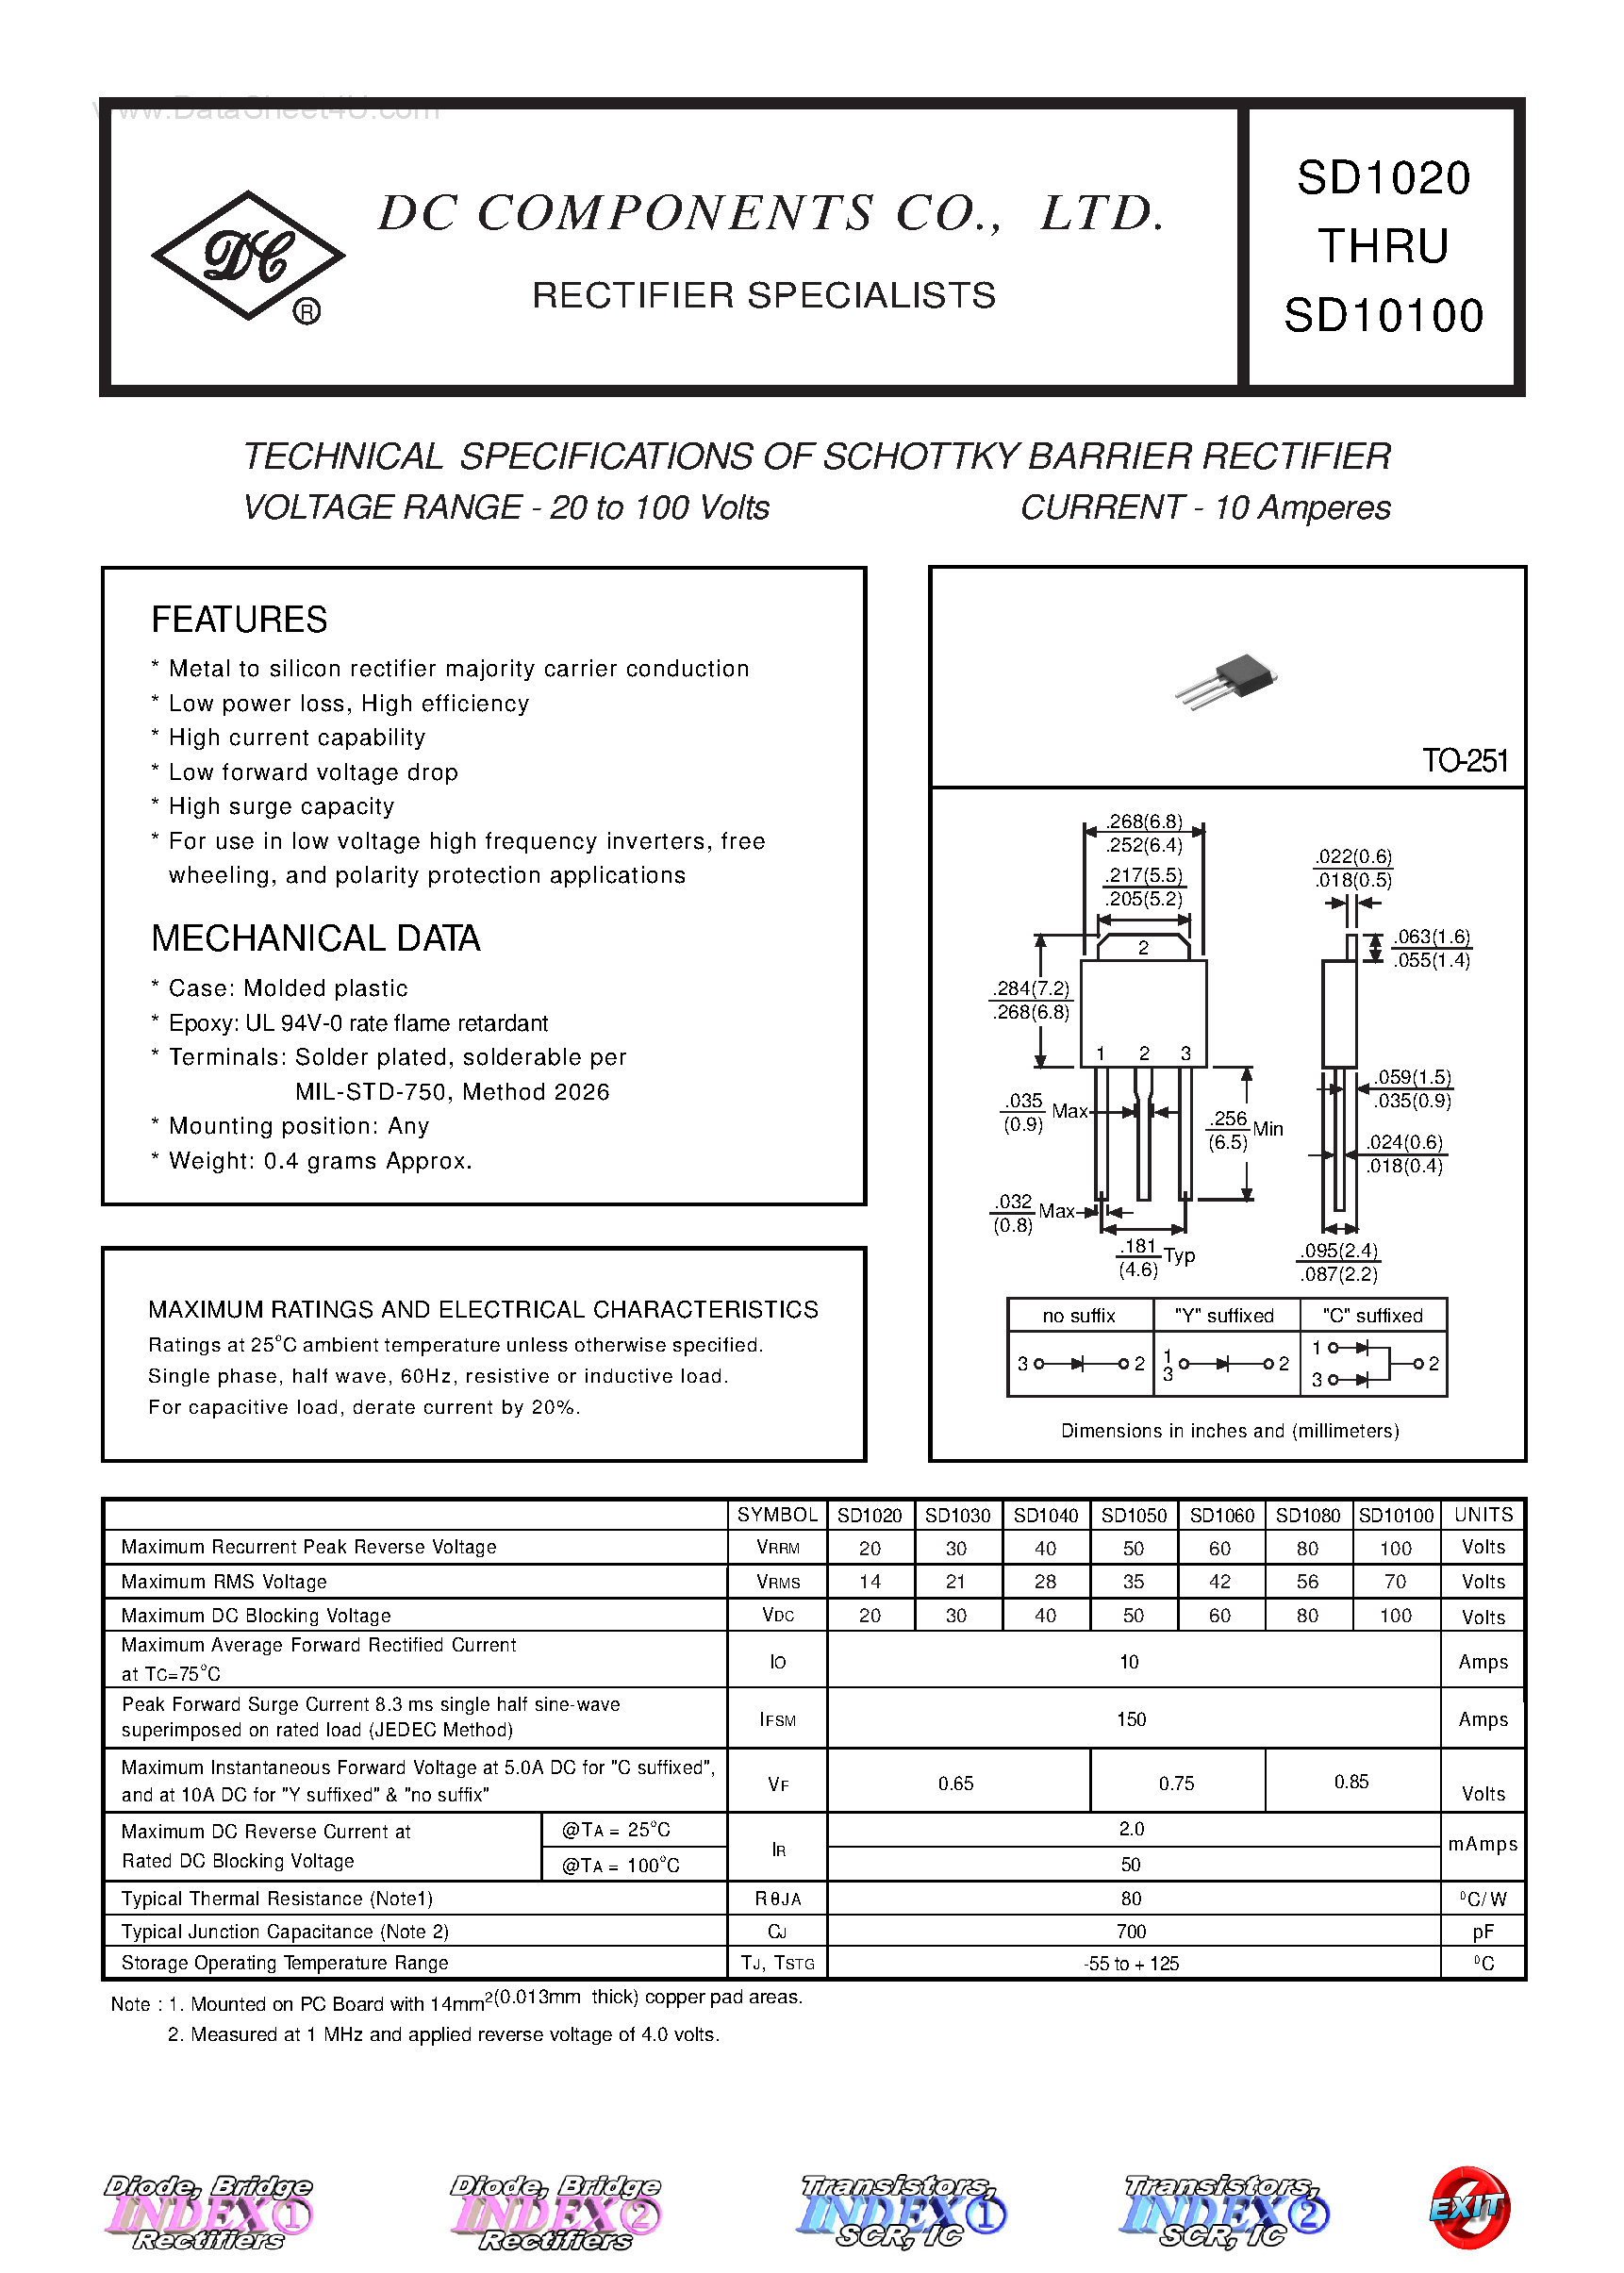 Даташит SD10100 - (SD1020 - SD10100) TECHNICAL SPECIFICATIONS OF SCHOTTKY BARRIER RECTIFIER страница 1